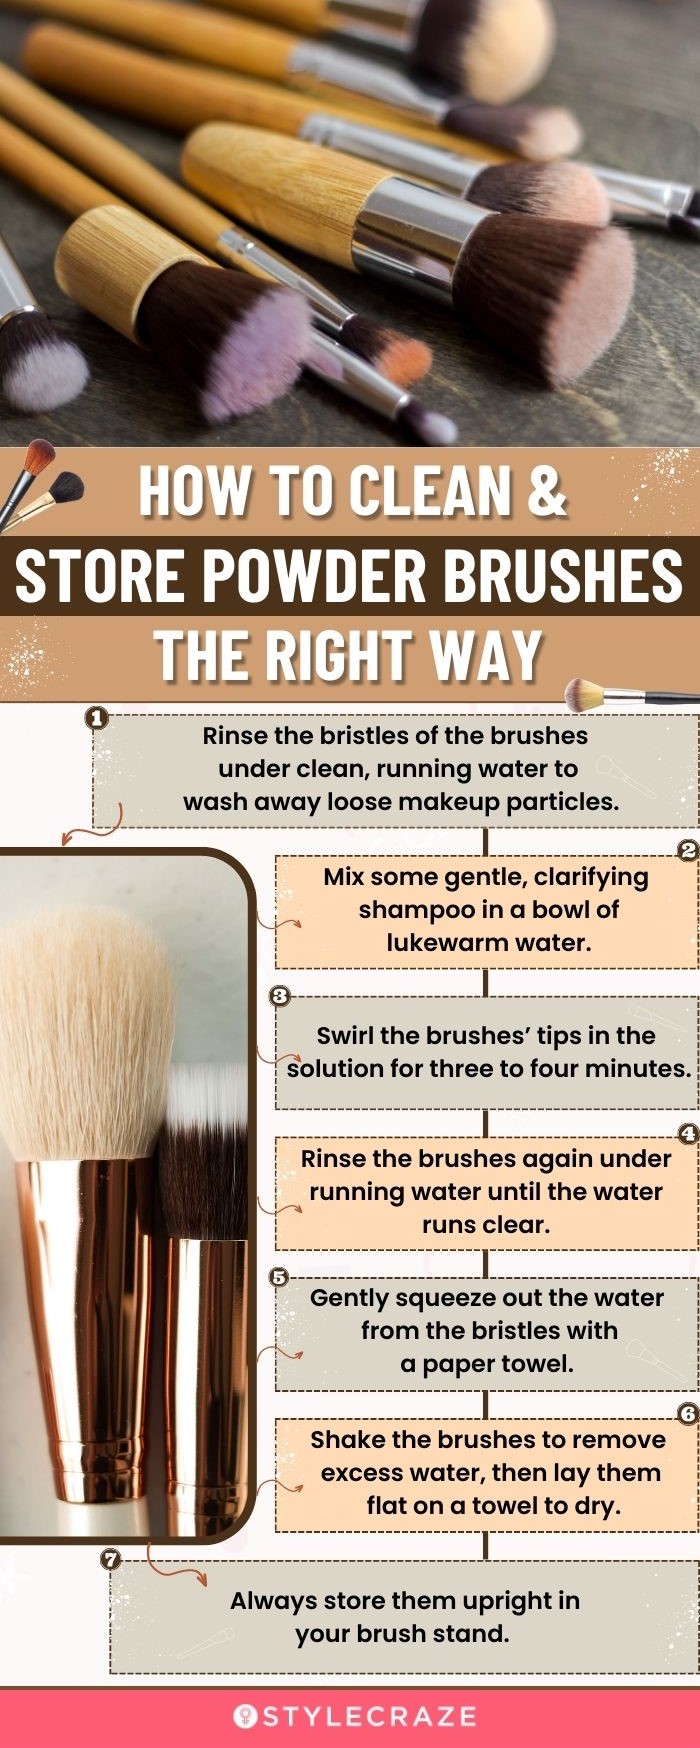 How To Clean & Store Powder Brushes (infographic)